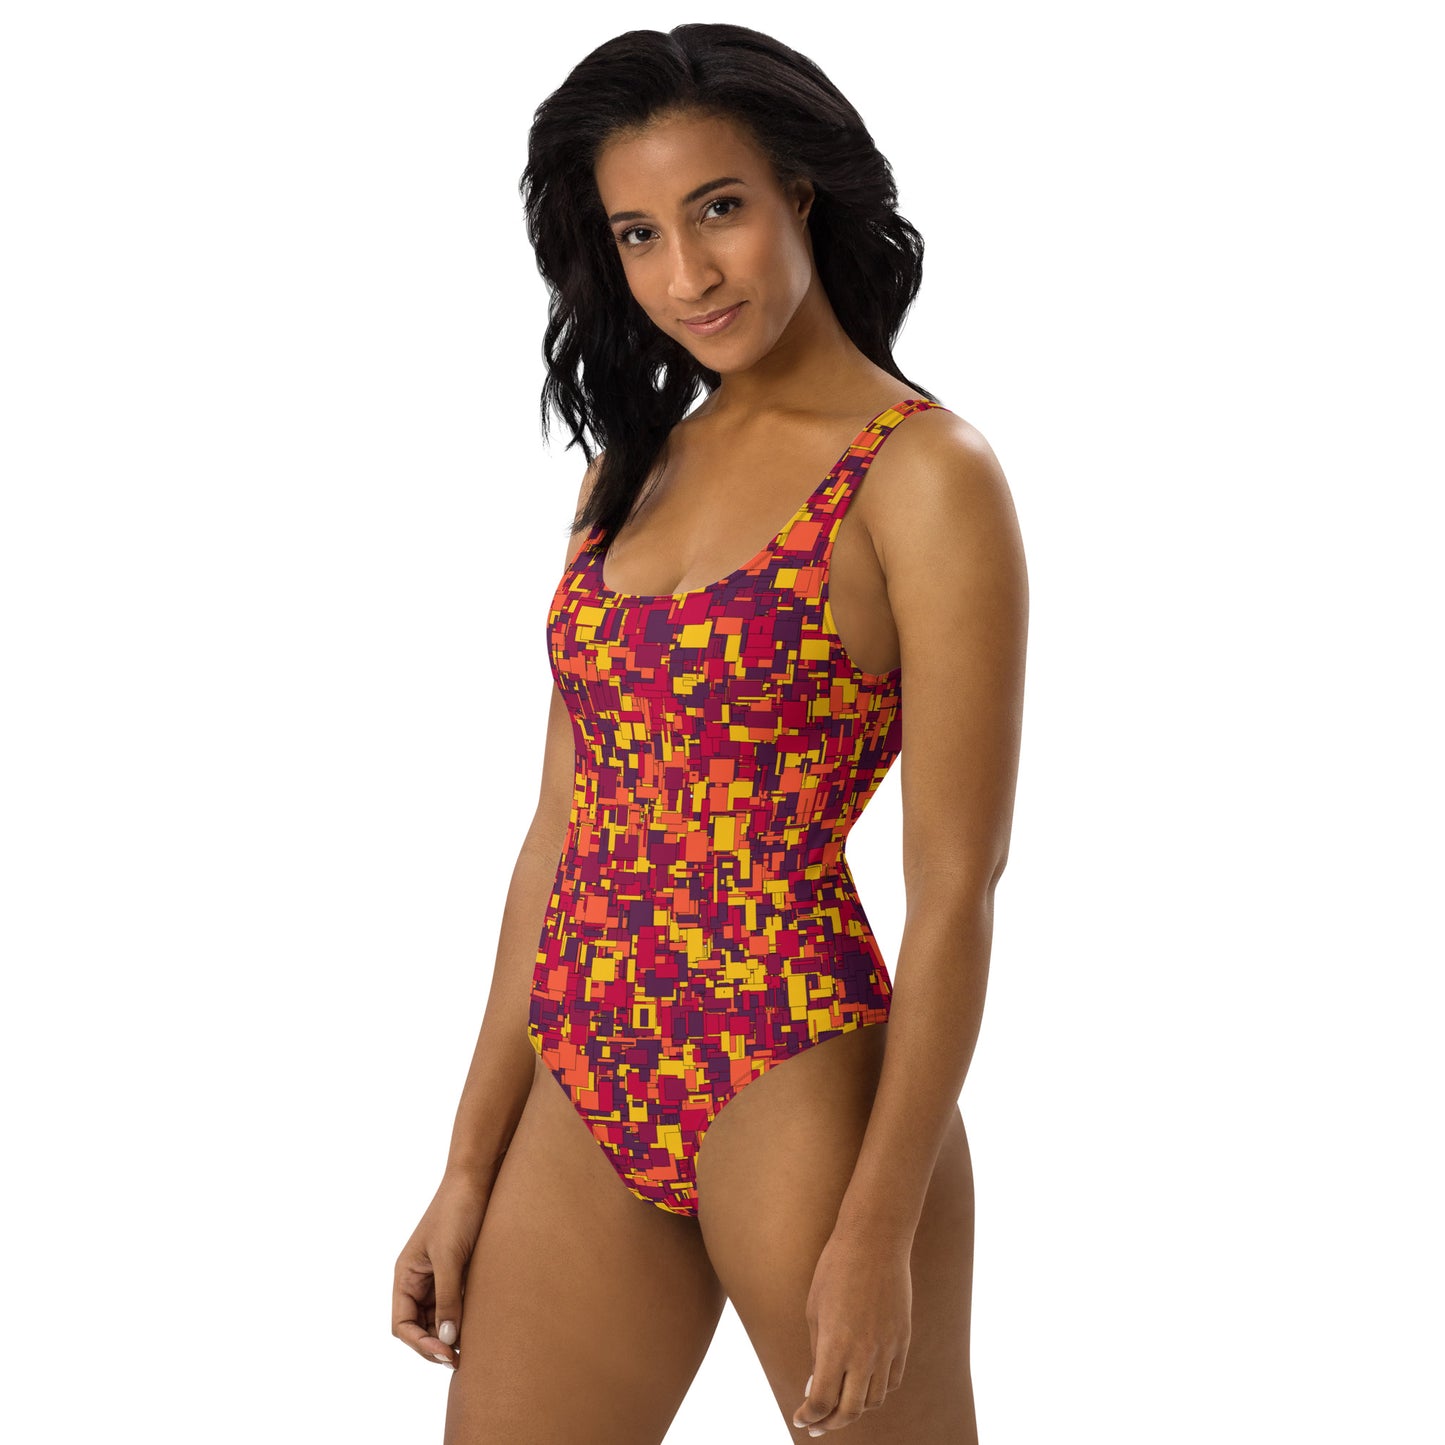 Our Soft and Warm One-Piece Swimsuit with Geometric Patterns is Perfect for a Cozy Day at the Beach